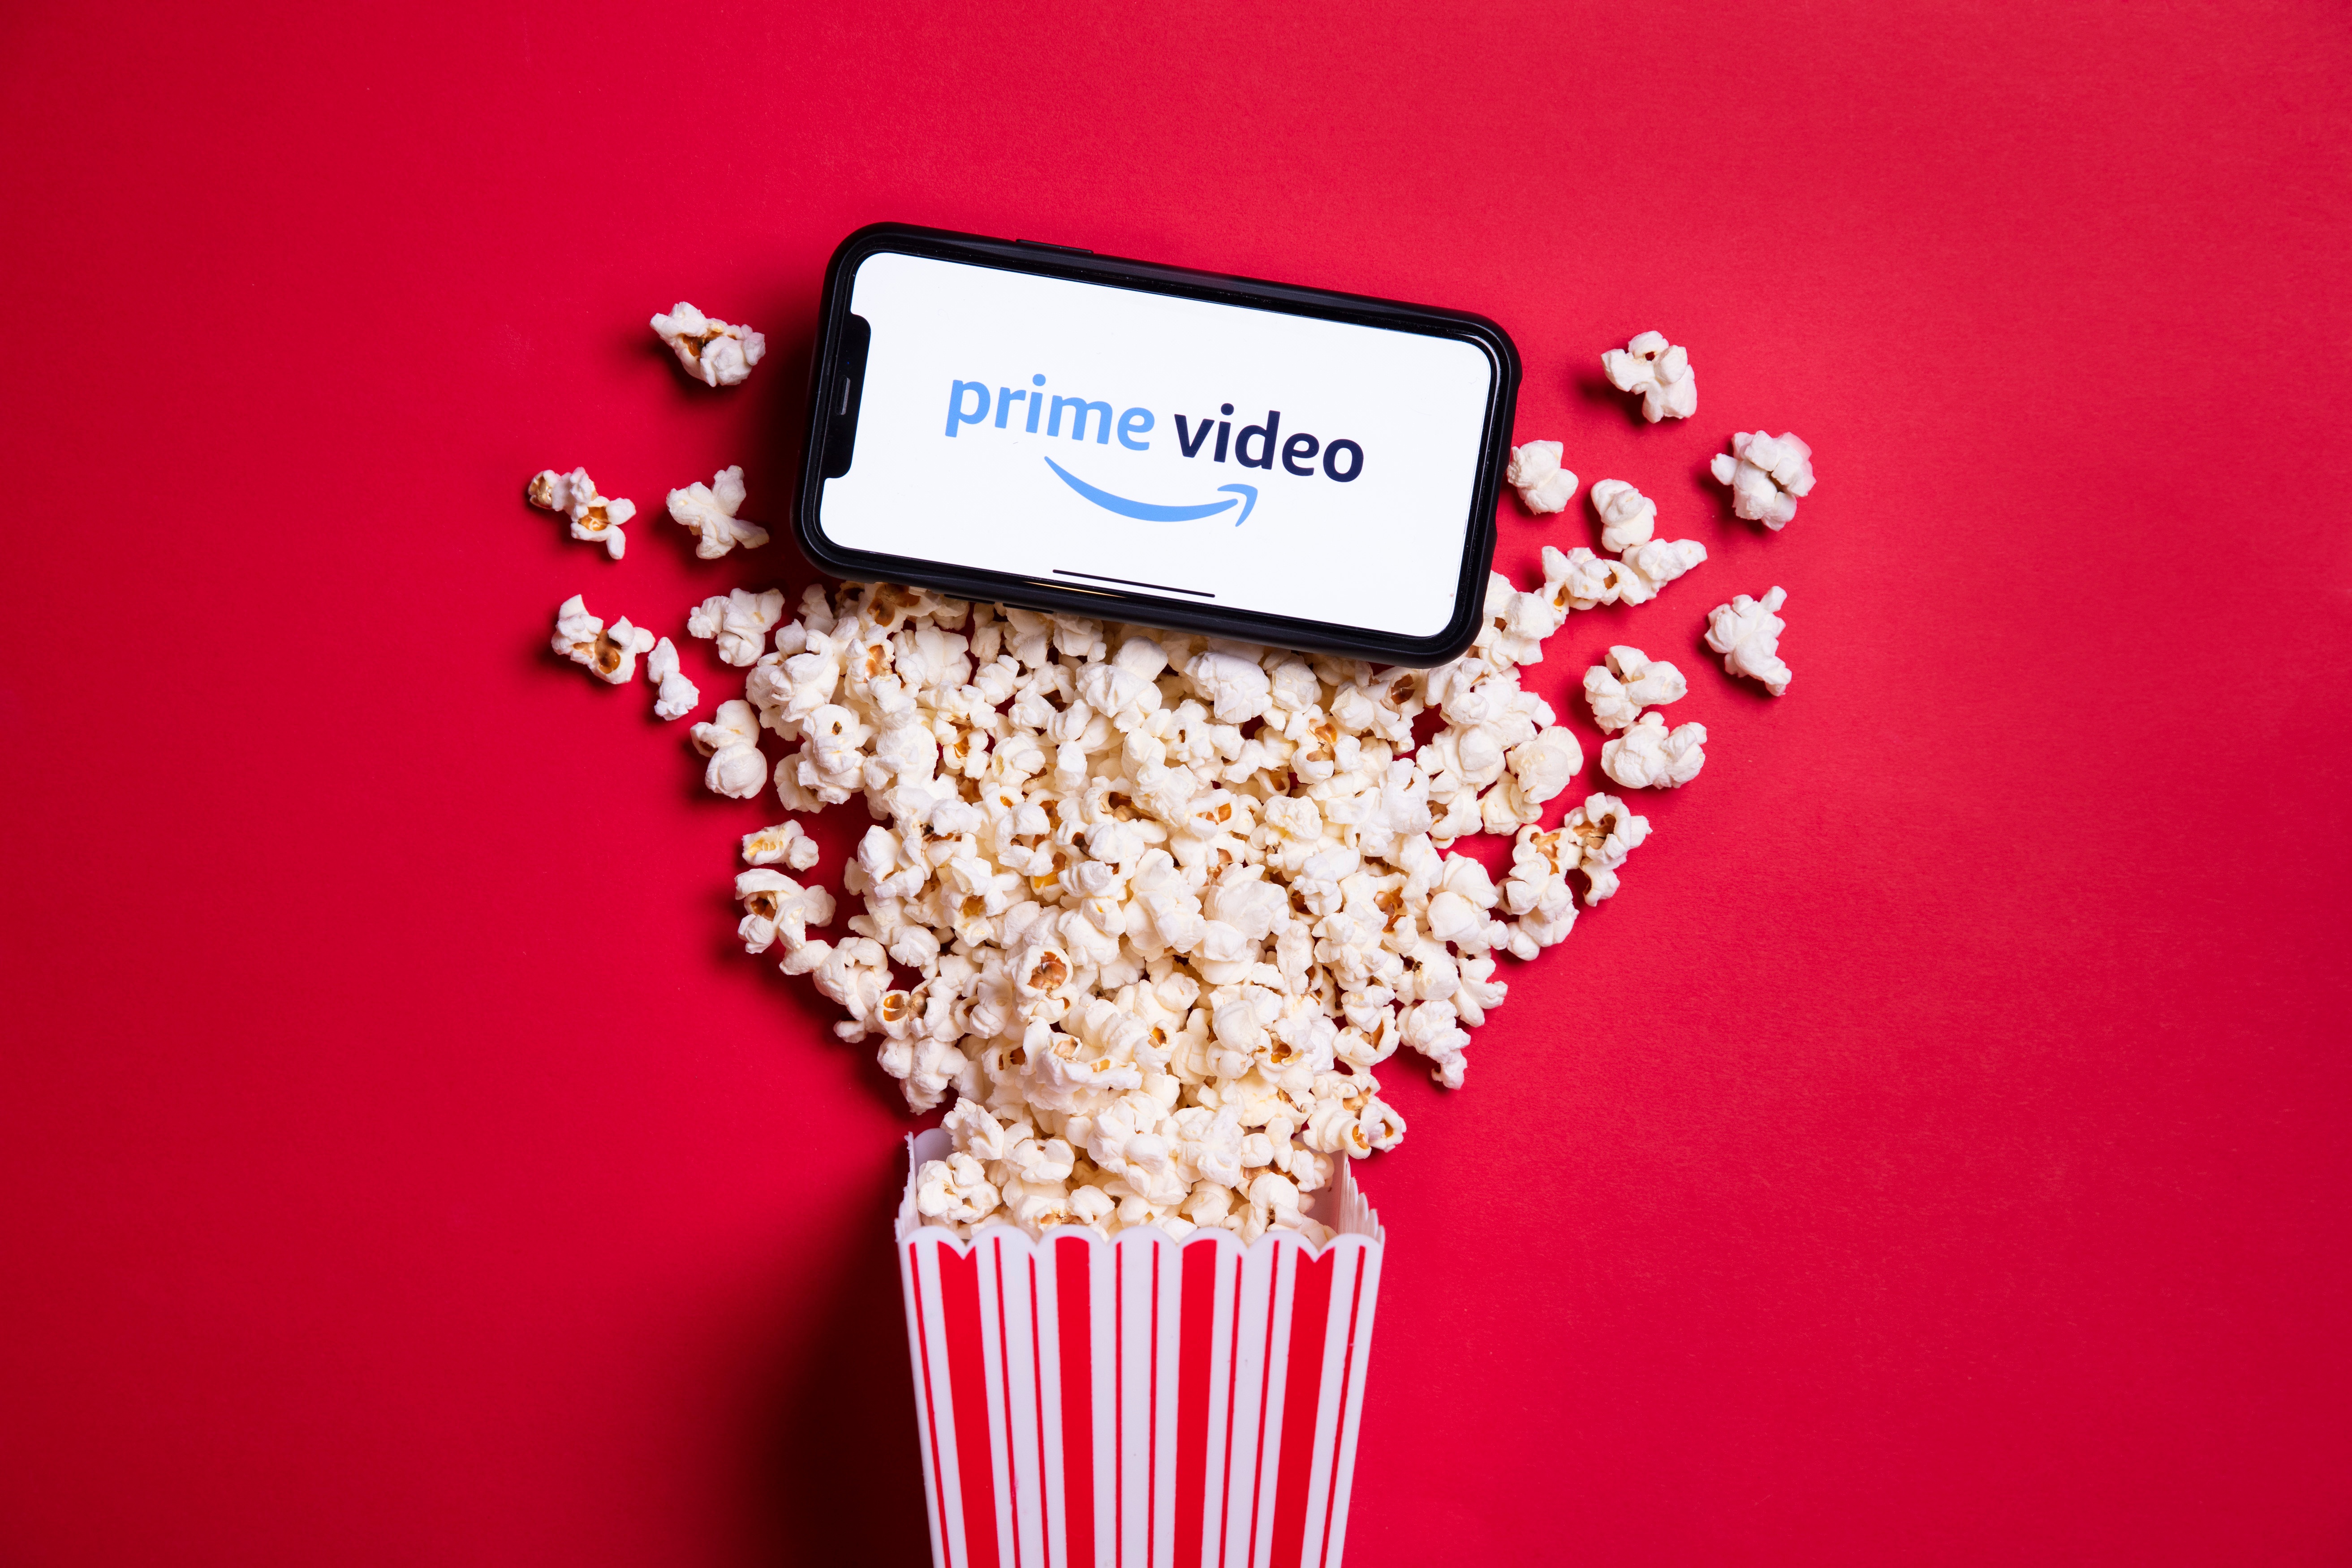 Amazon’s Prime Video is Offering $6 in Credit if You Spend $30 During Prime Day